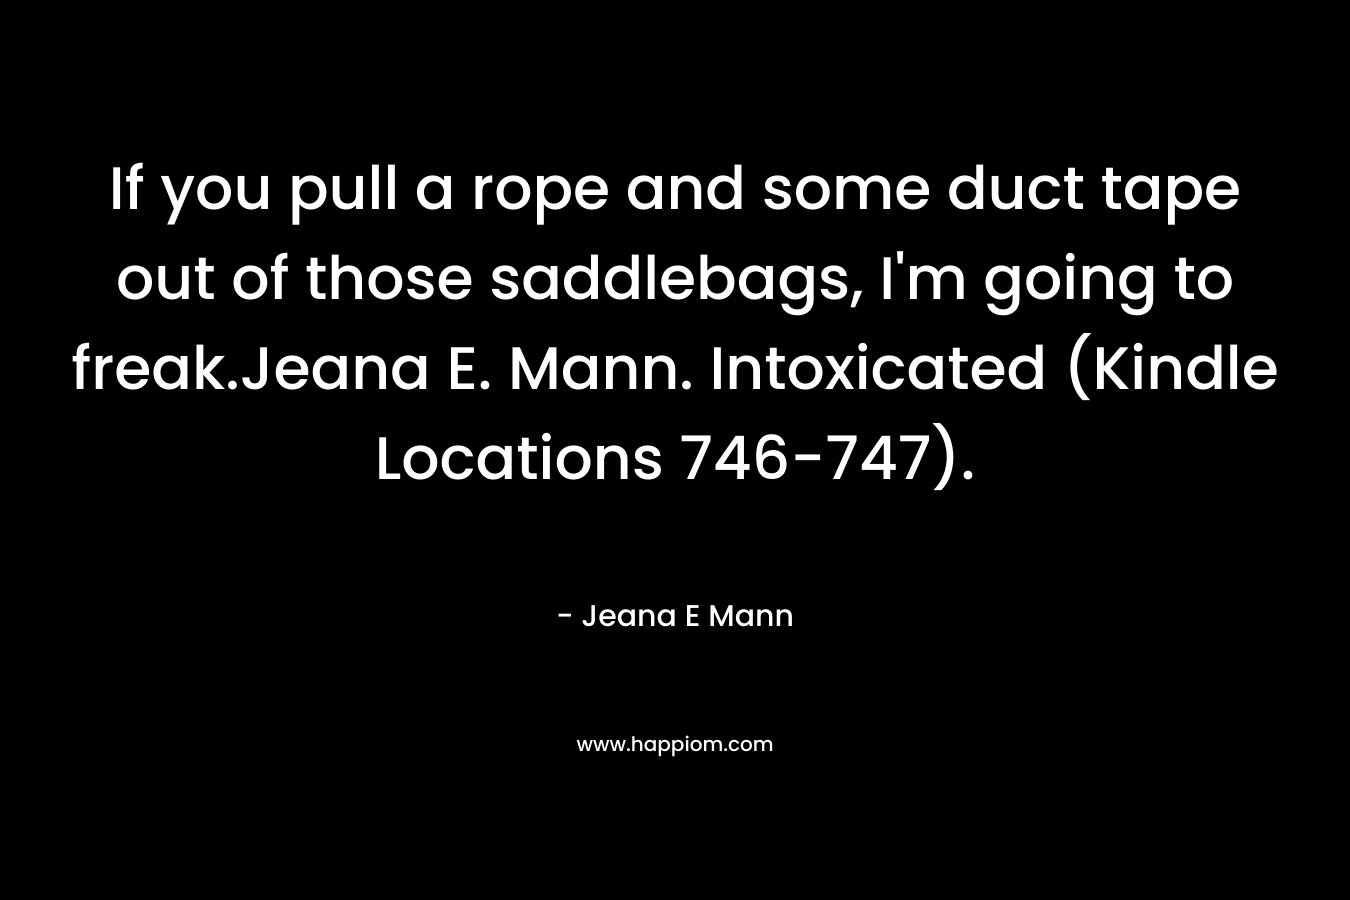 If you pull a rope and some duct tape out of those saddlebags, I’m going to freak.Jeana E. Mann. Intoxicated (Kindle Locations 746-747). – Jeana E Mann